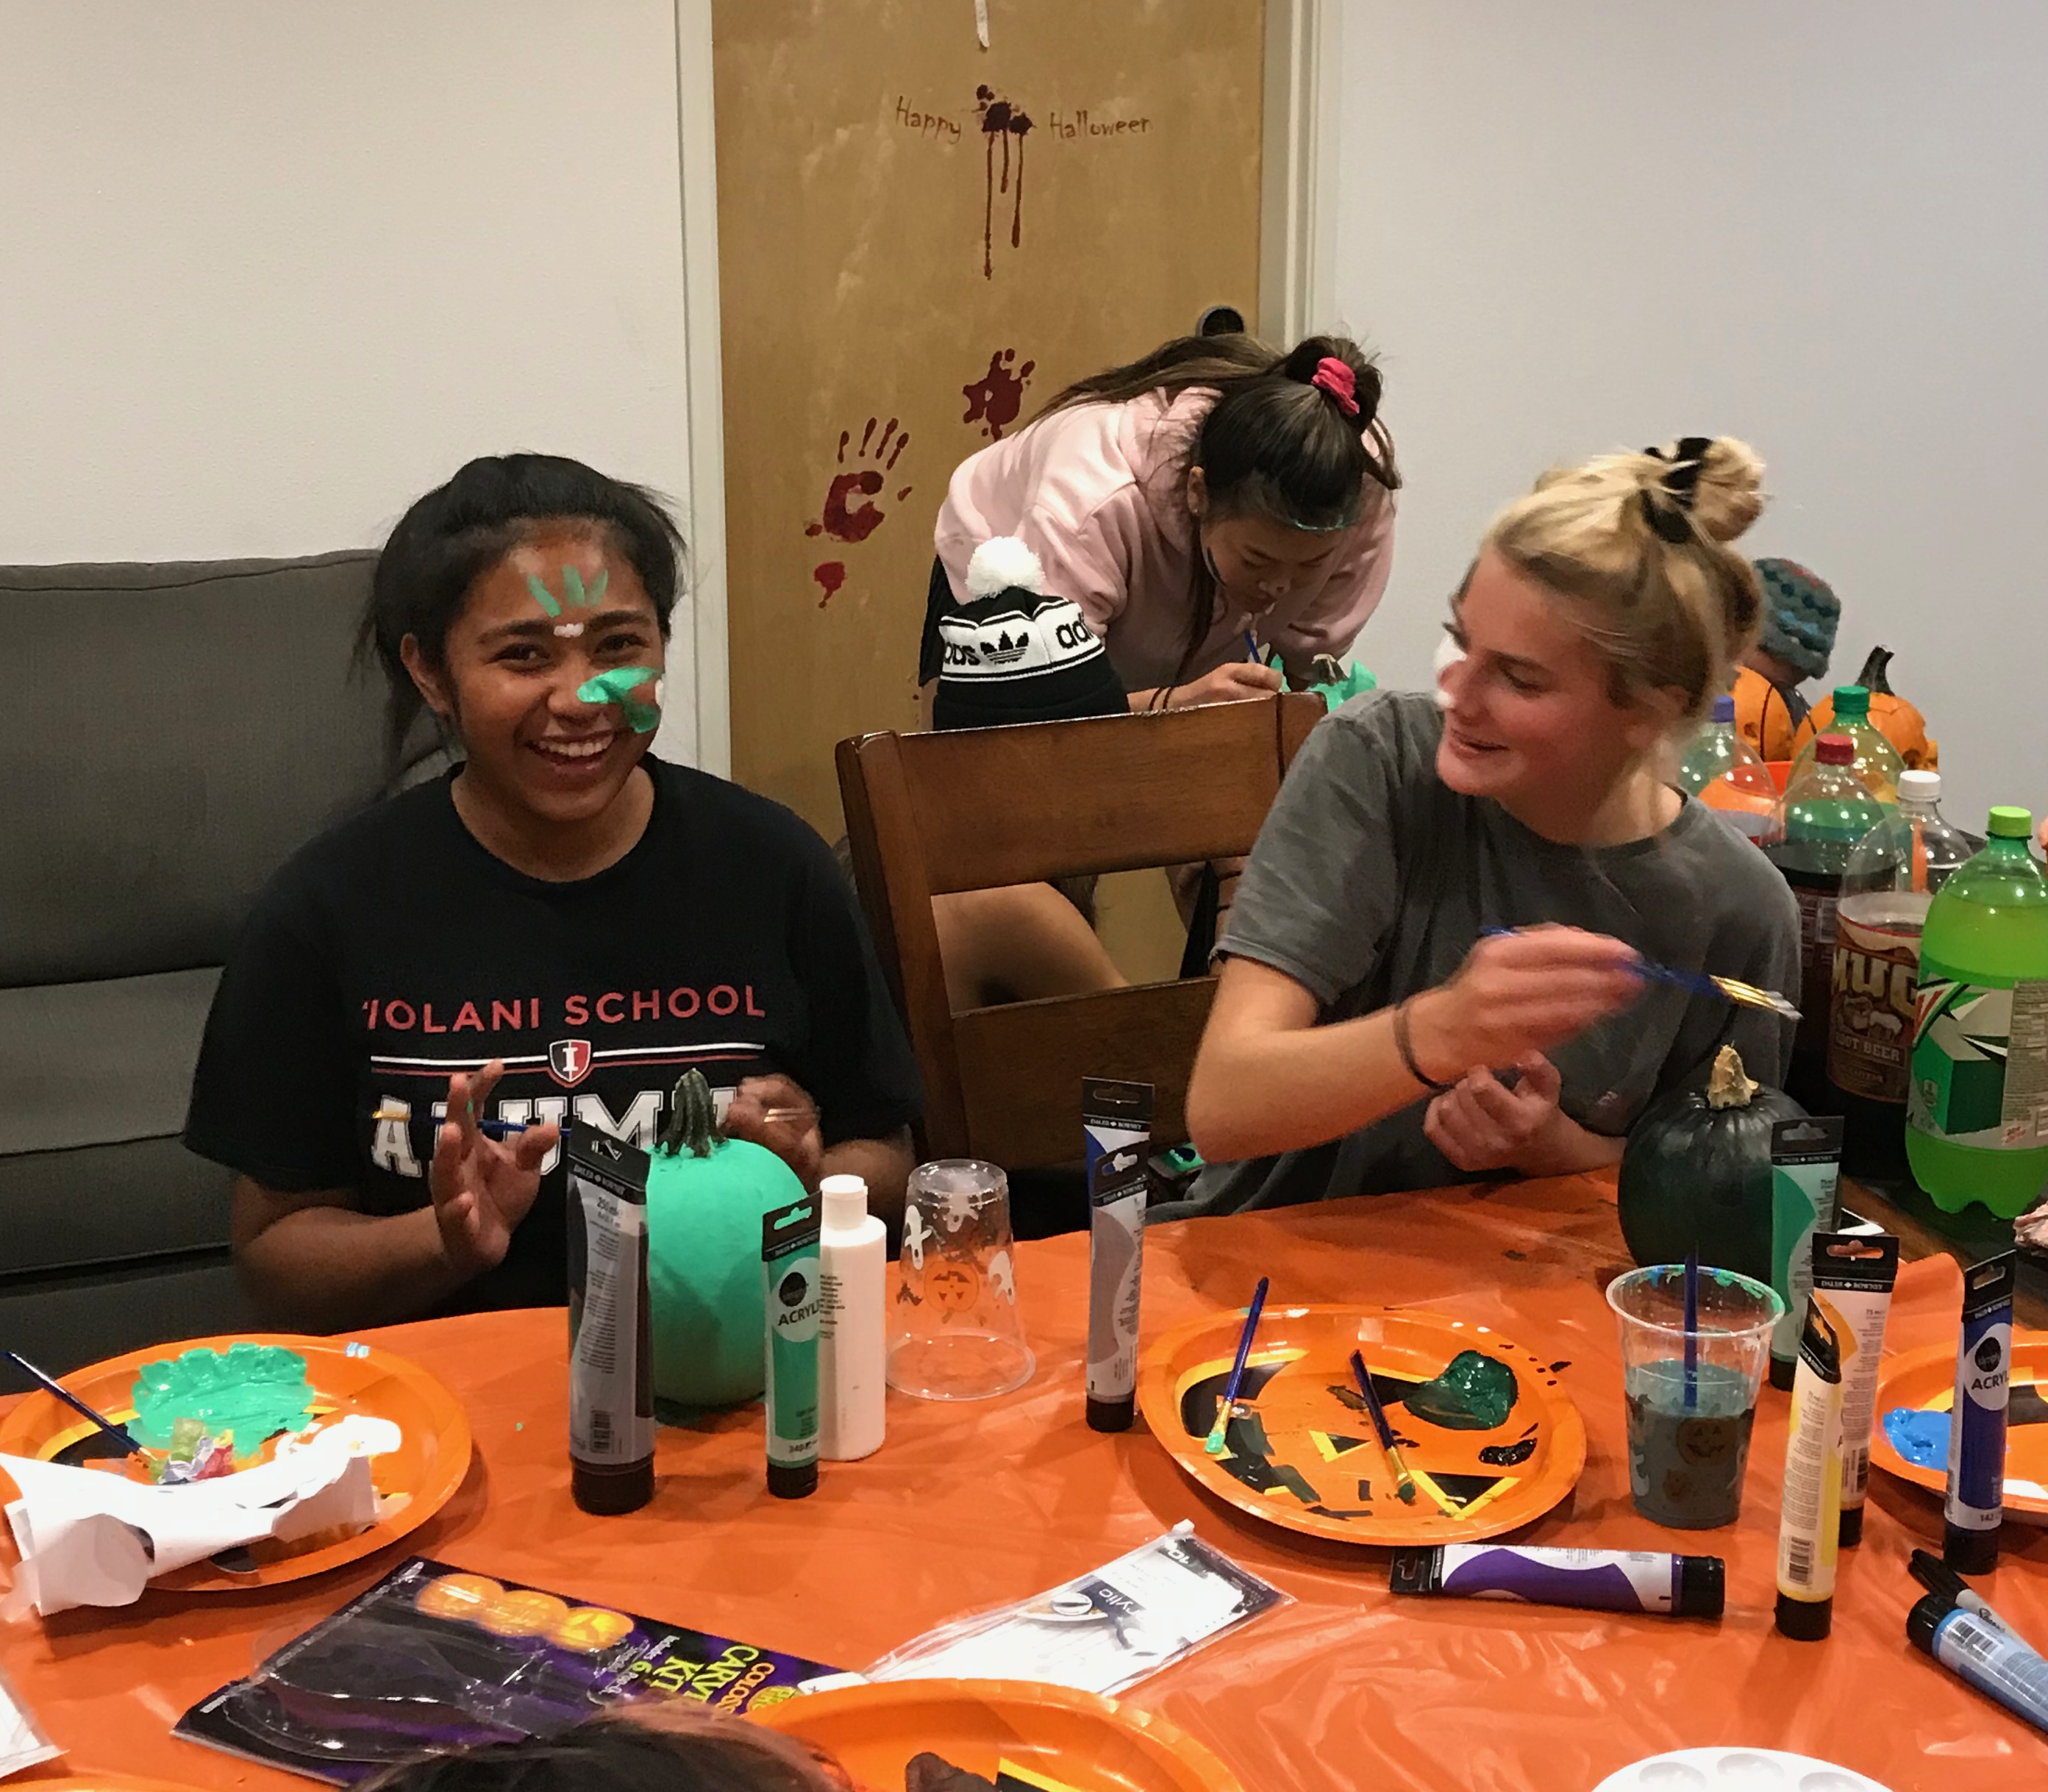 Painting faces as well as pumpkins